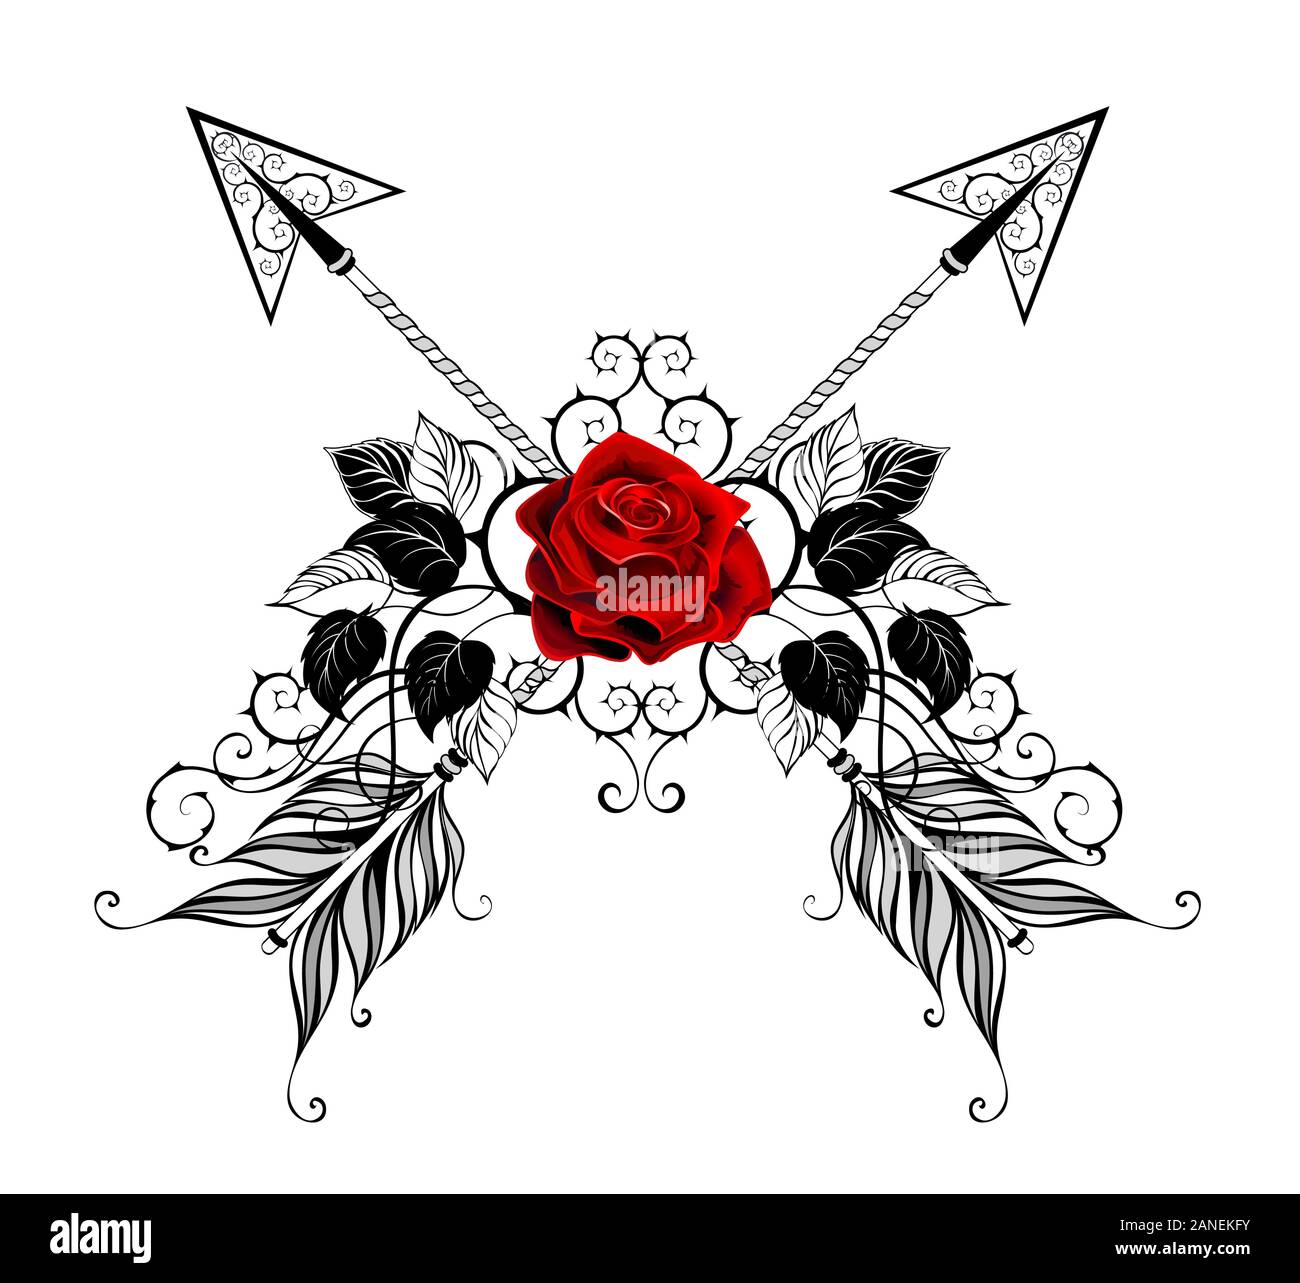 Two crossed, patterned arrows decorated with red, blooming roses with black leaves and stems on white background. Tattoo style. Stock Vector